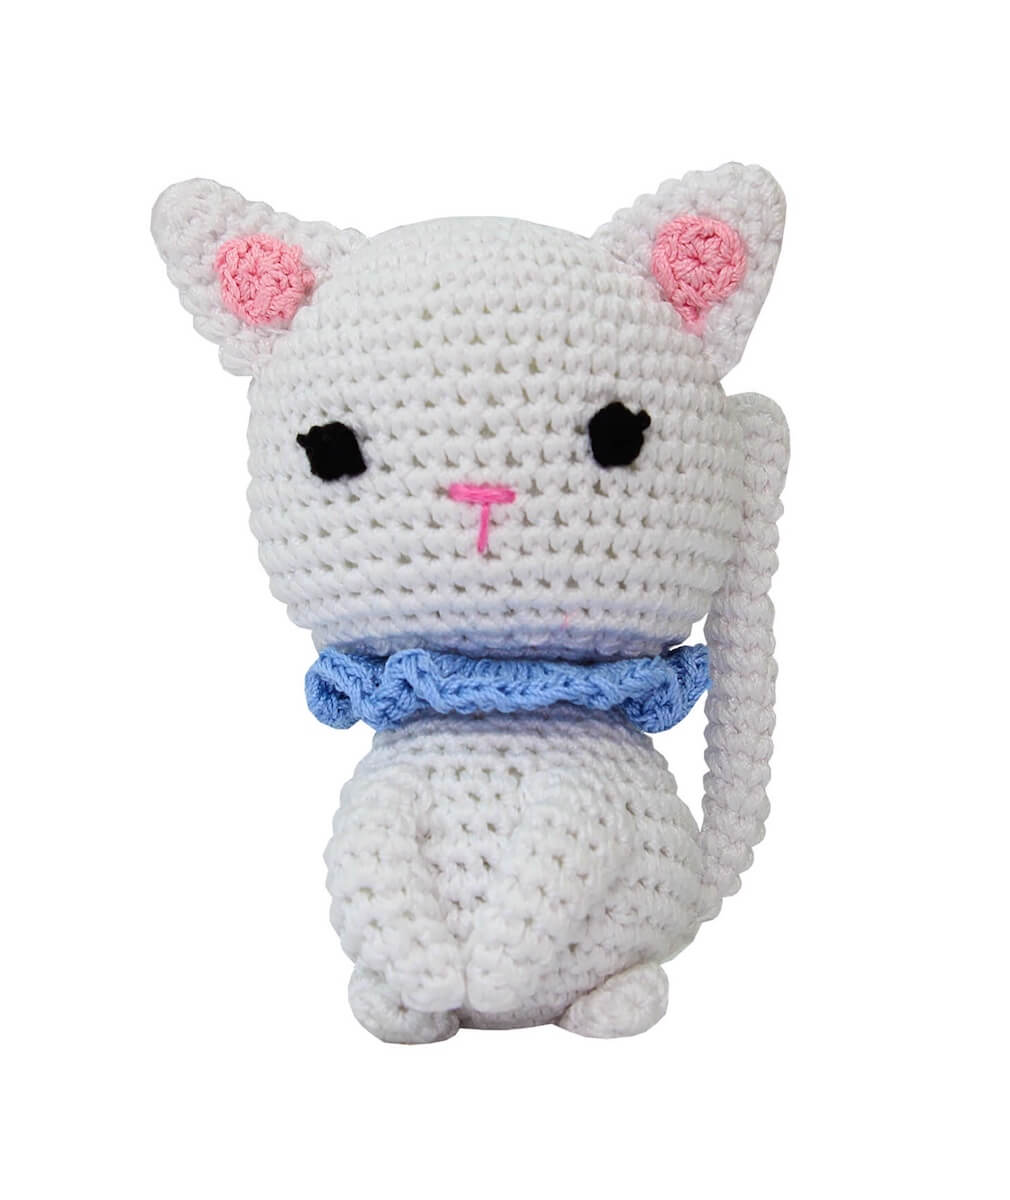 Knit Knacks "Kitty Purry" organic cotton dog toy. White cat with purple collar and pink ears.